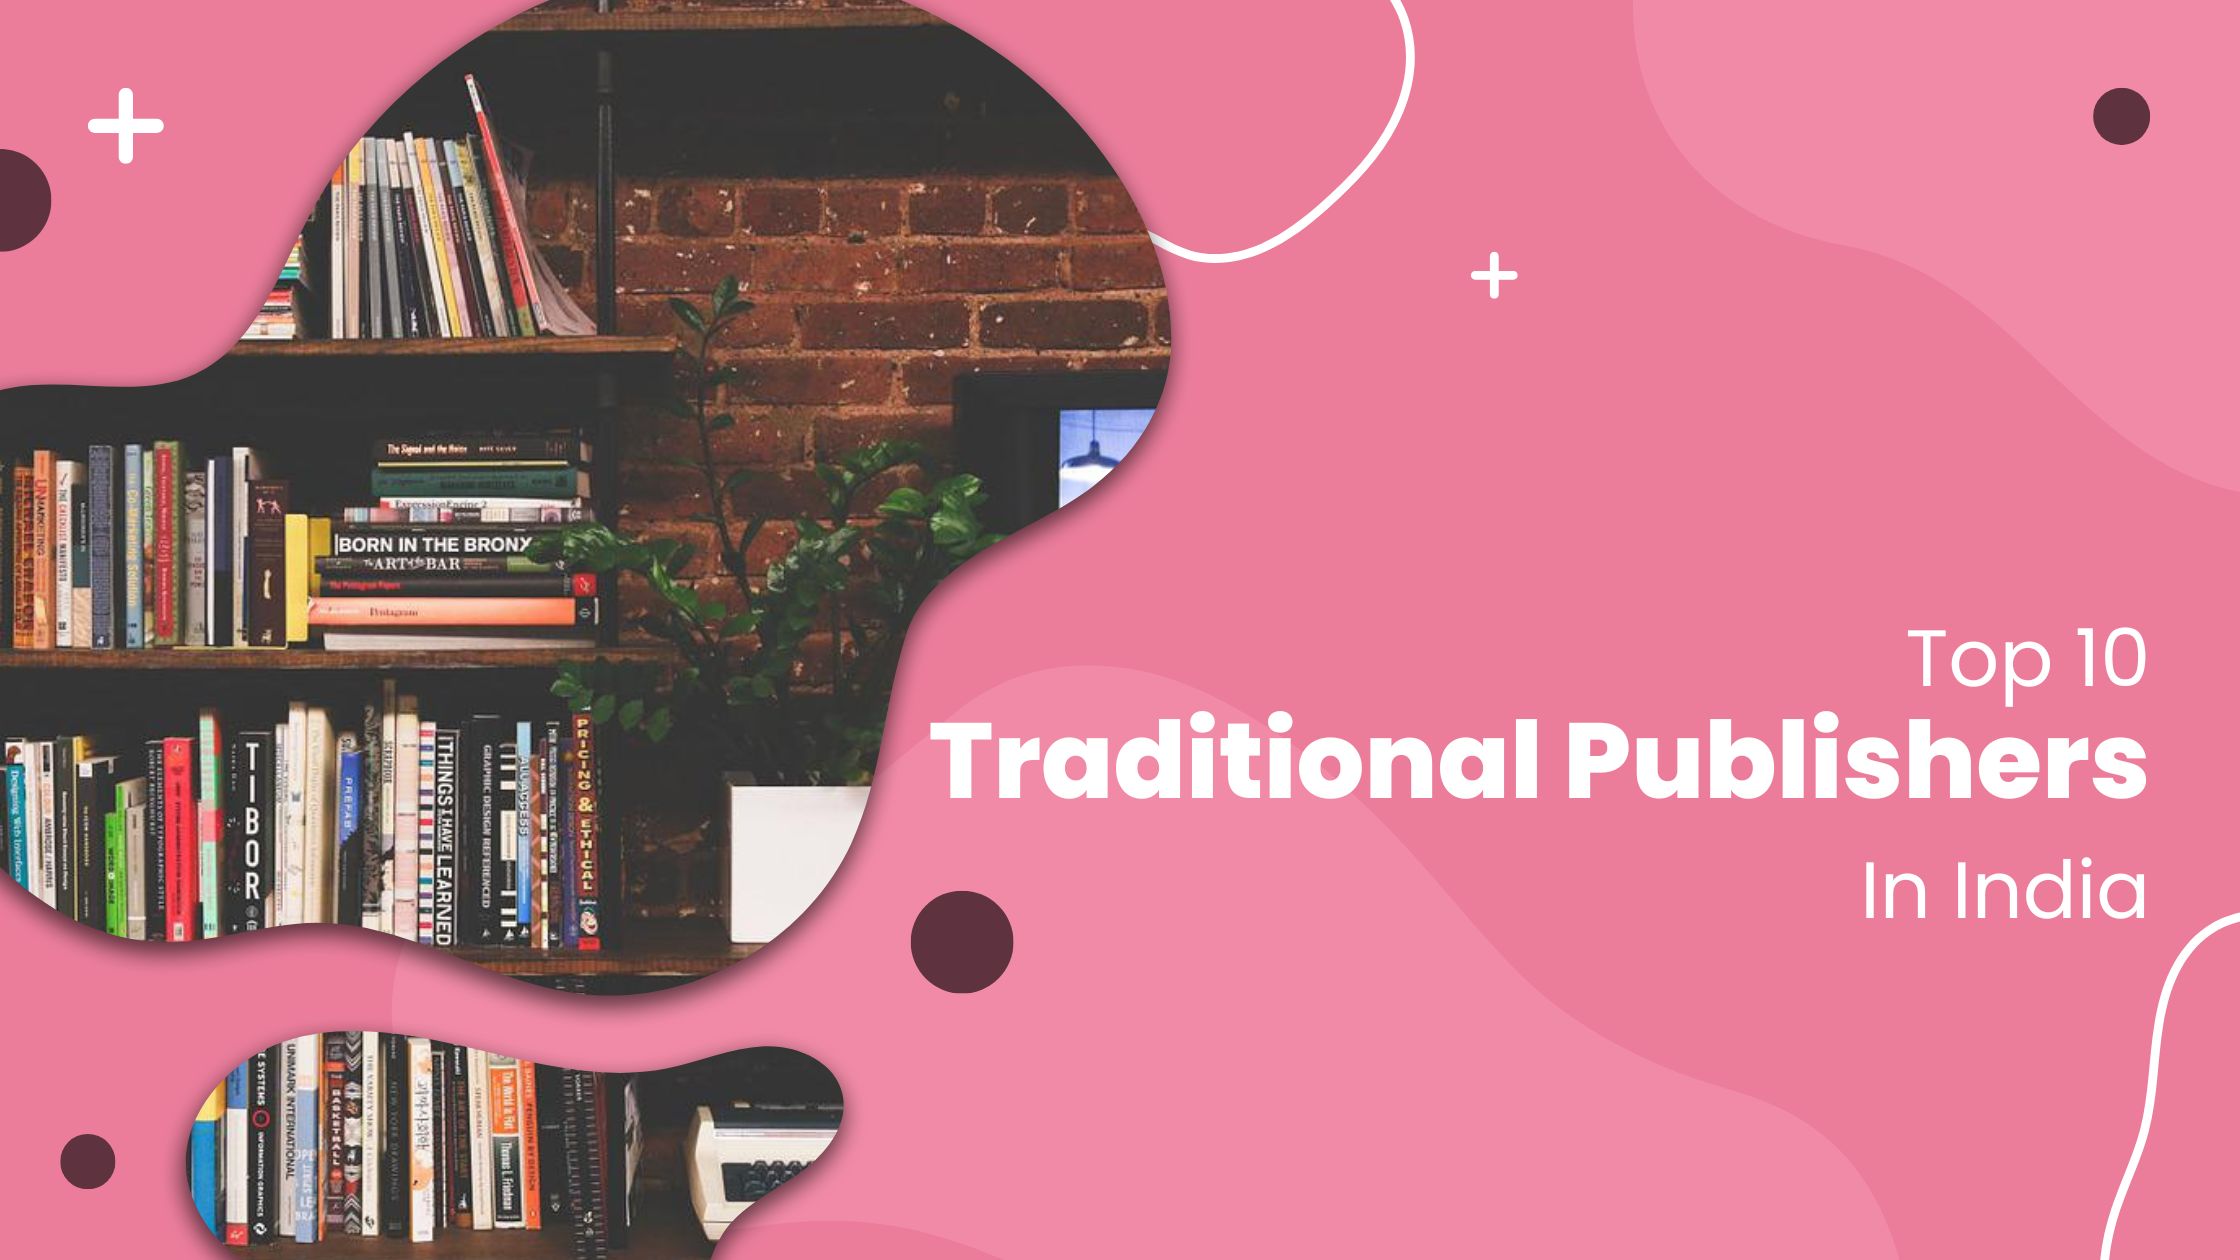 Top 10 traditional publishers in India